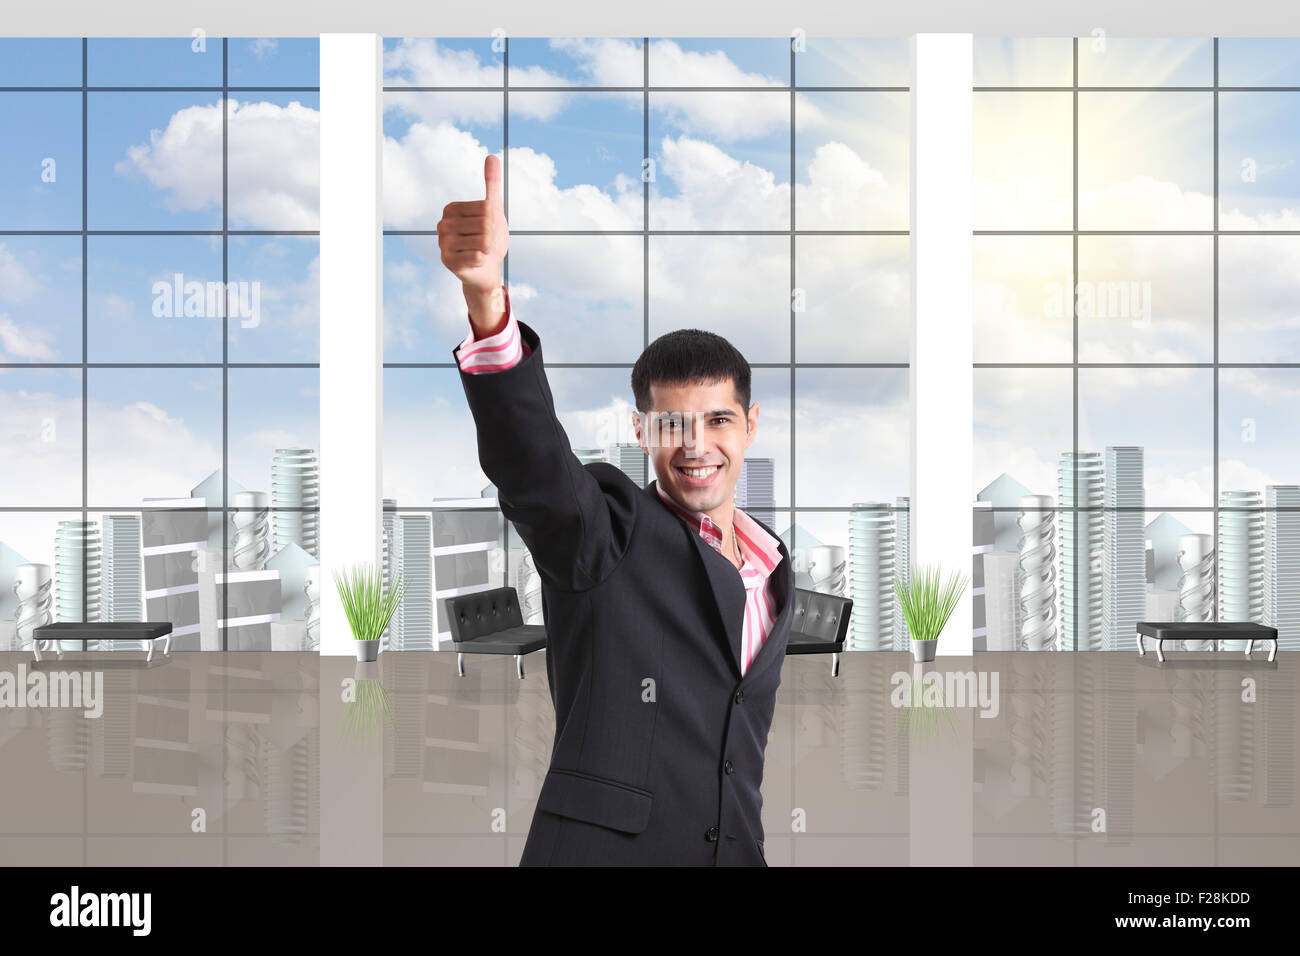 Happy businessman shows thumbs up sign Stock Photo